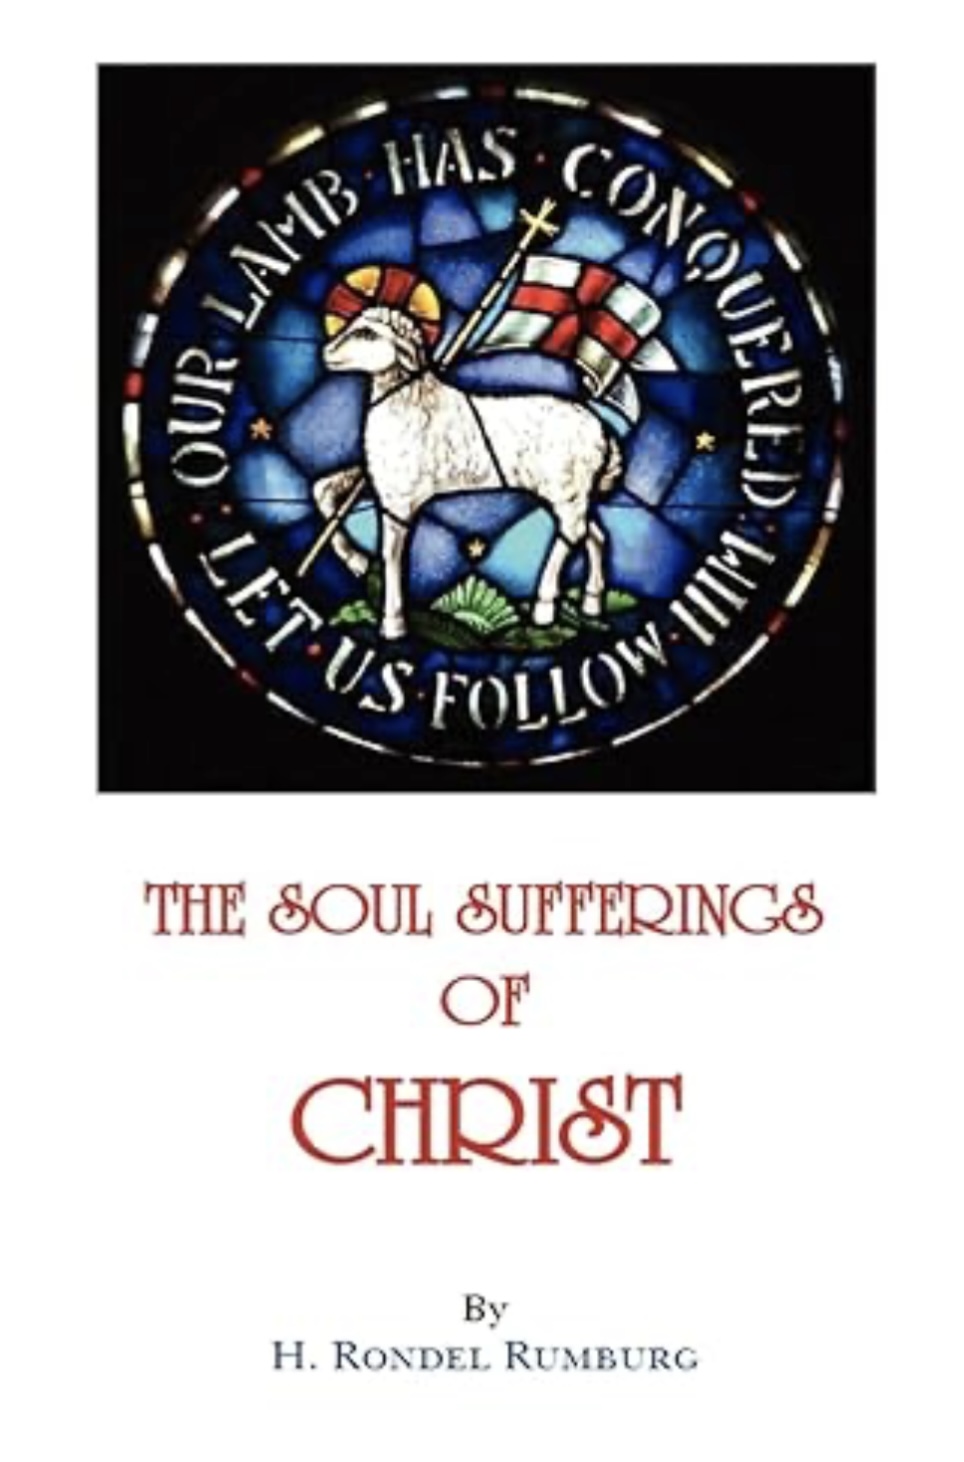 Book Review on Ron Rumburg’s Soul Sufferings of Christ